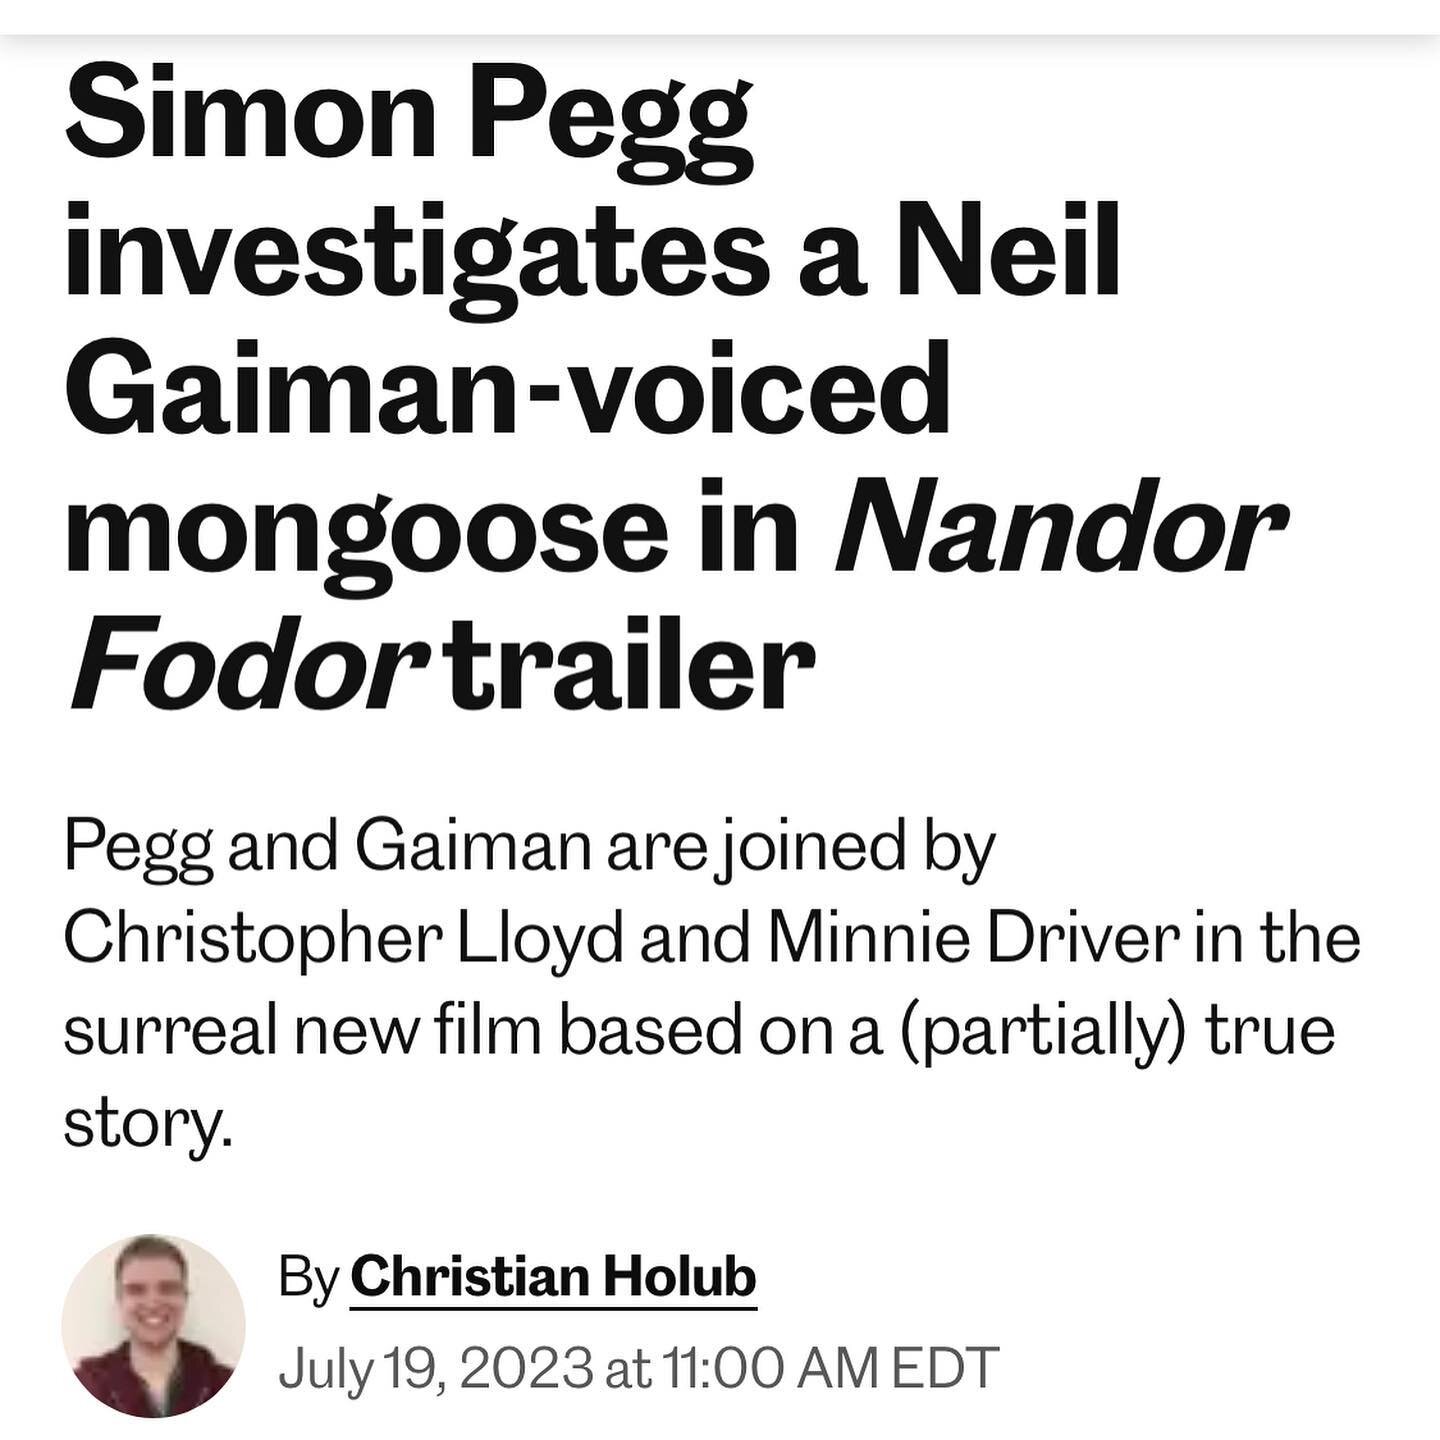 🎥 It&rsquo;s here! I had the privilege of scoring @soaringsigal&rsquo;s newest wonderful film &ldquo;Nandor Fodor and the Talking Mongoose.&rdquo; Starring @simonpegg and a host of others, this quirky (somewhat) true story was a joy to work on, and 